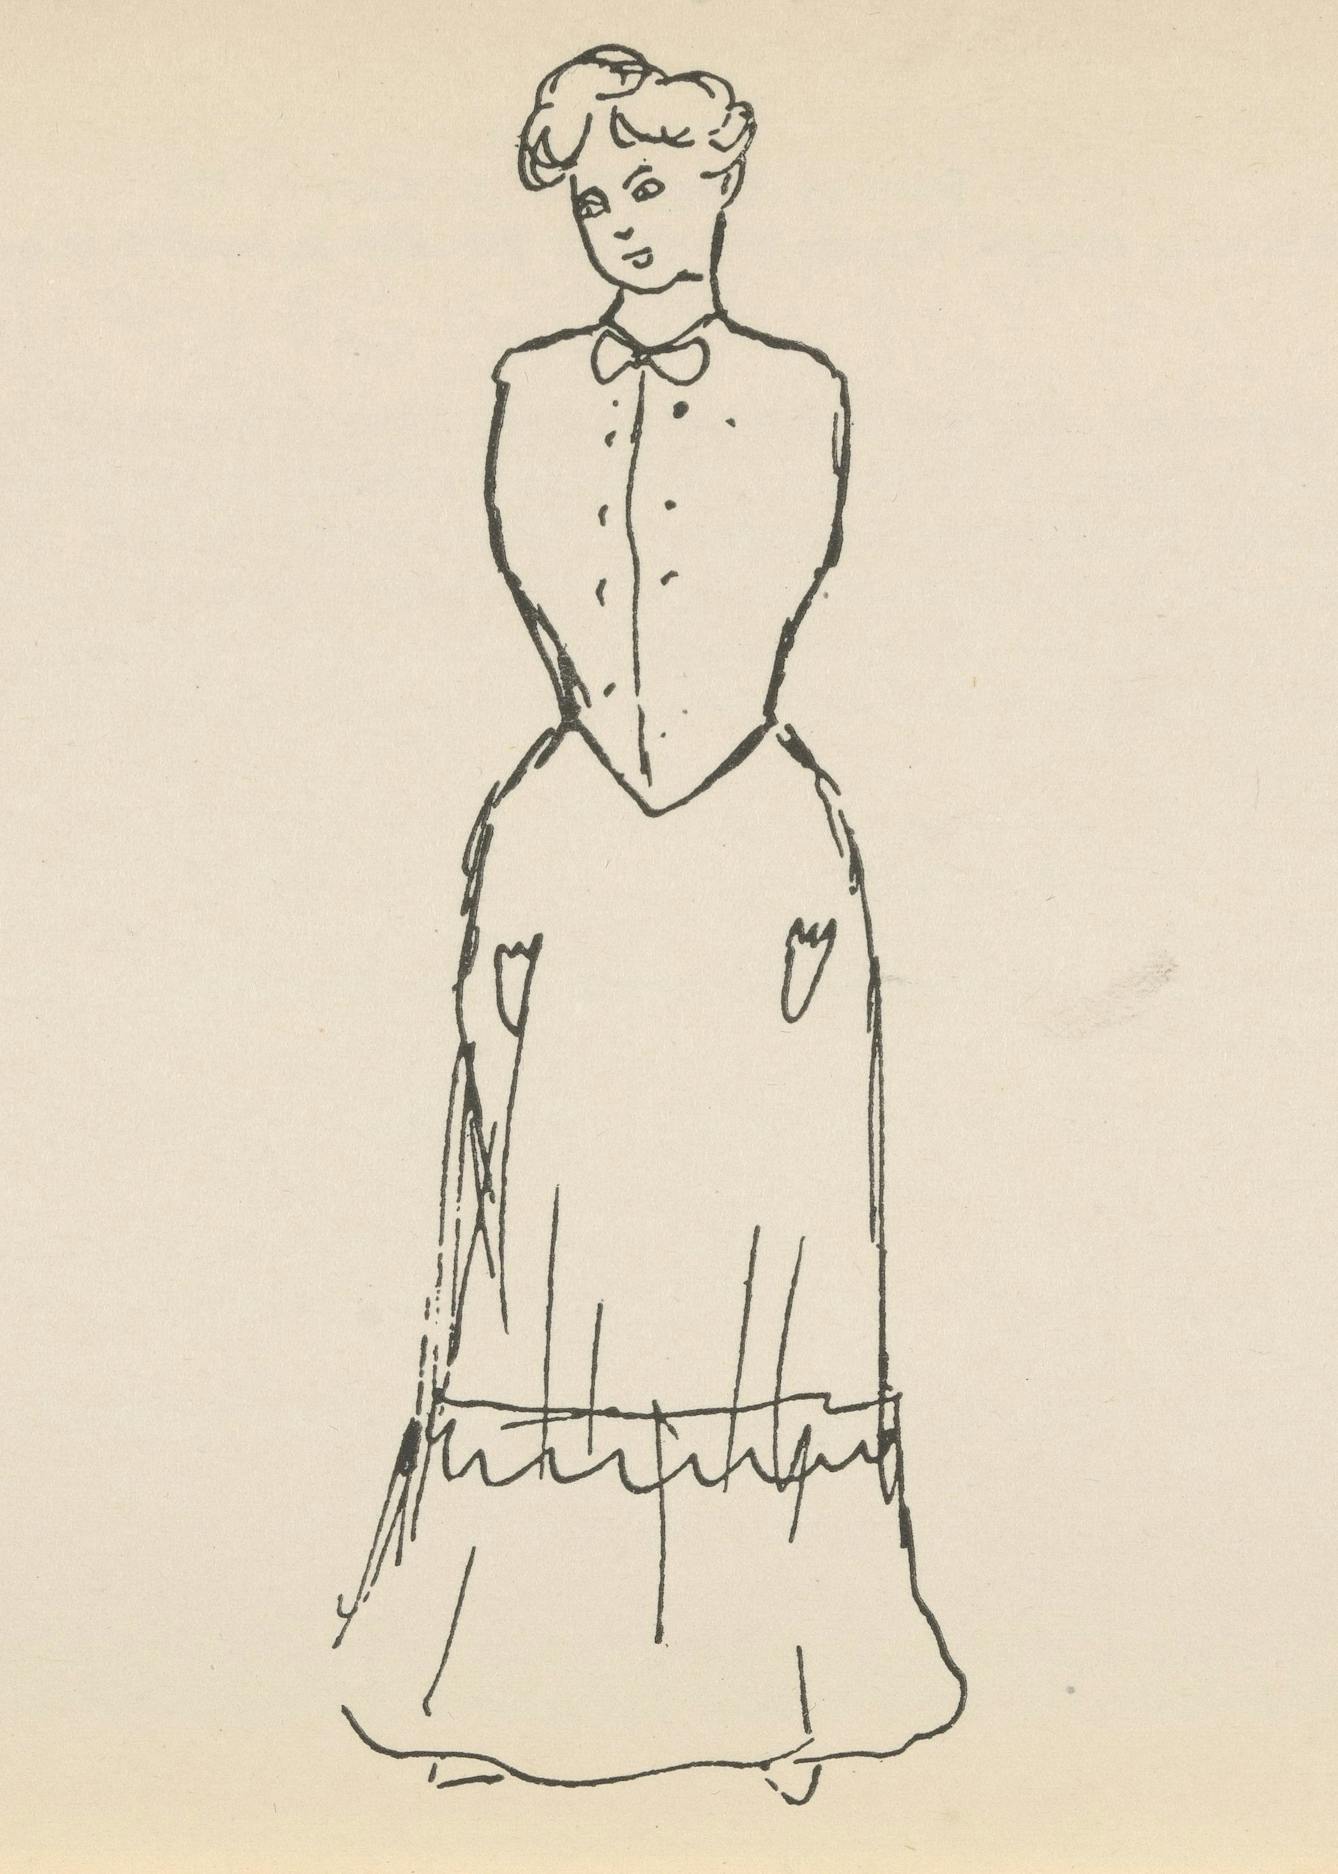 Black and white line drawing showing a woman with some limbs missing.